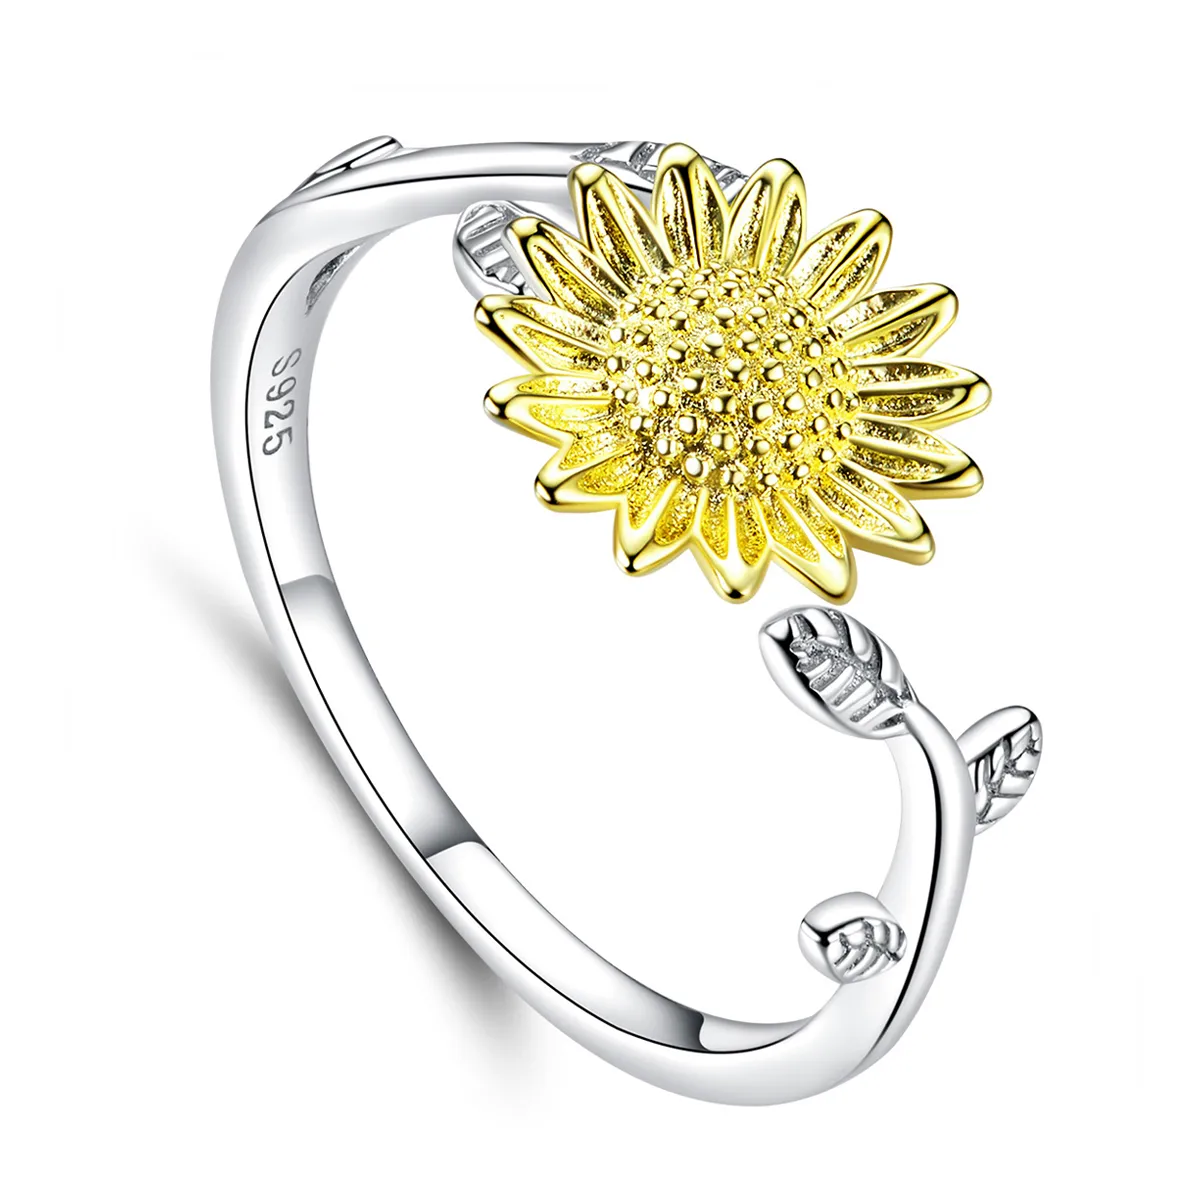 Pandora Style Two Tone Bicolor Golden Sunflowers Open Ring - SCR596